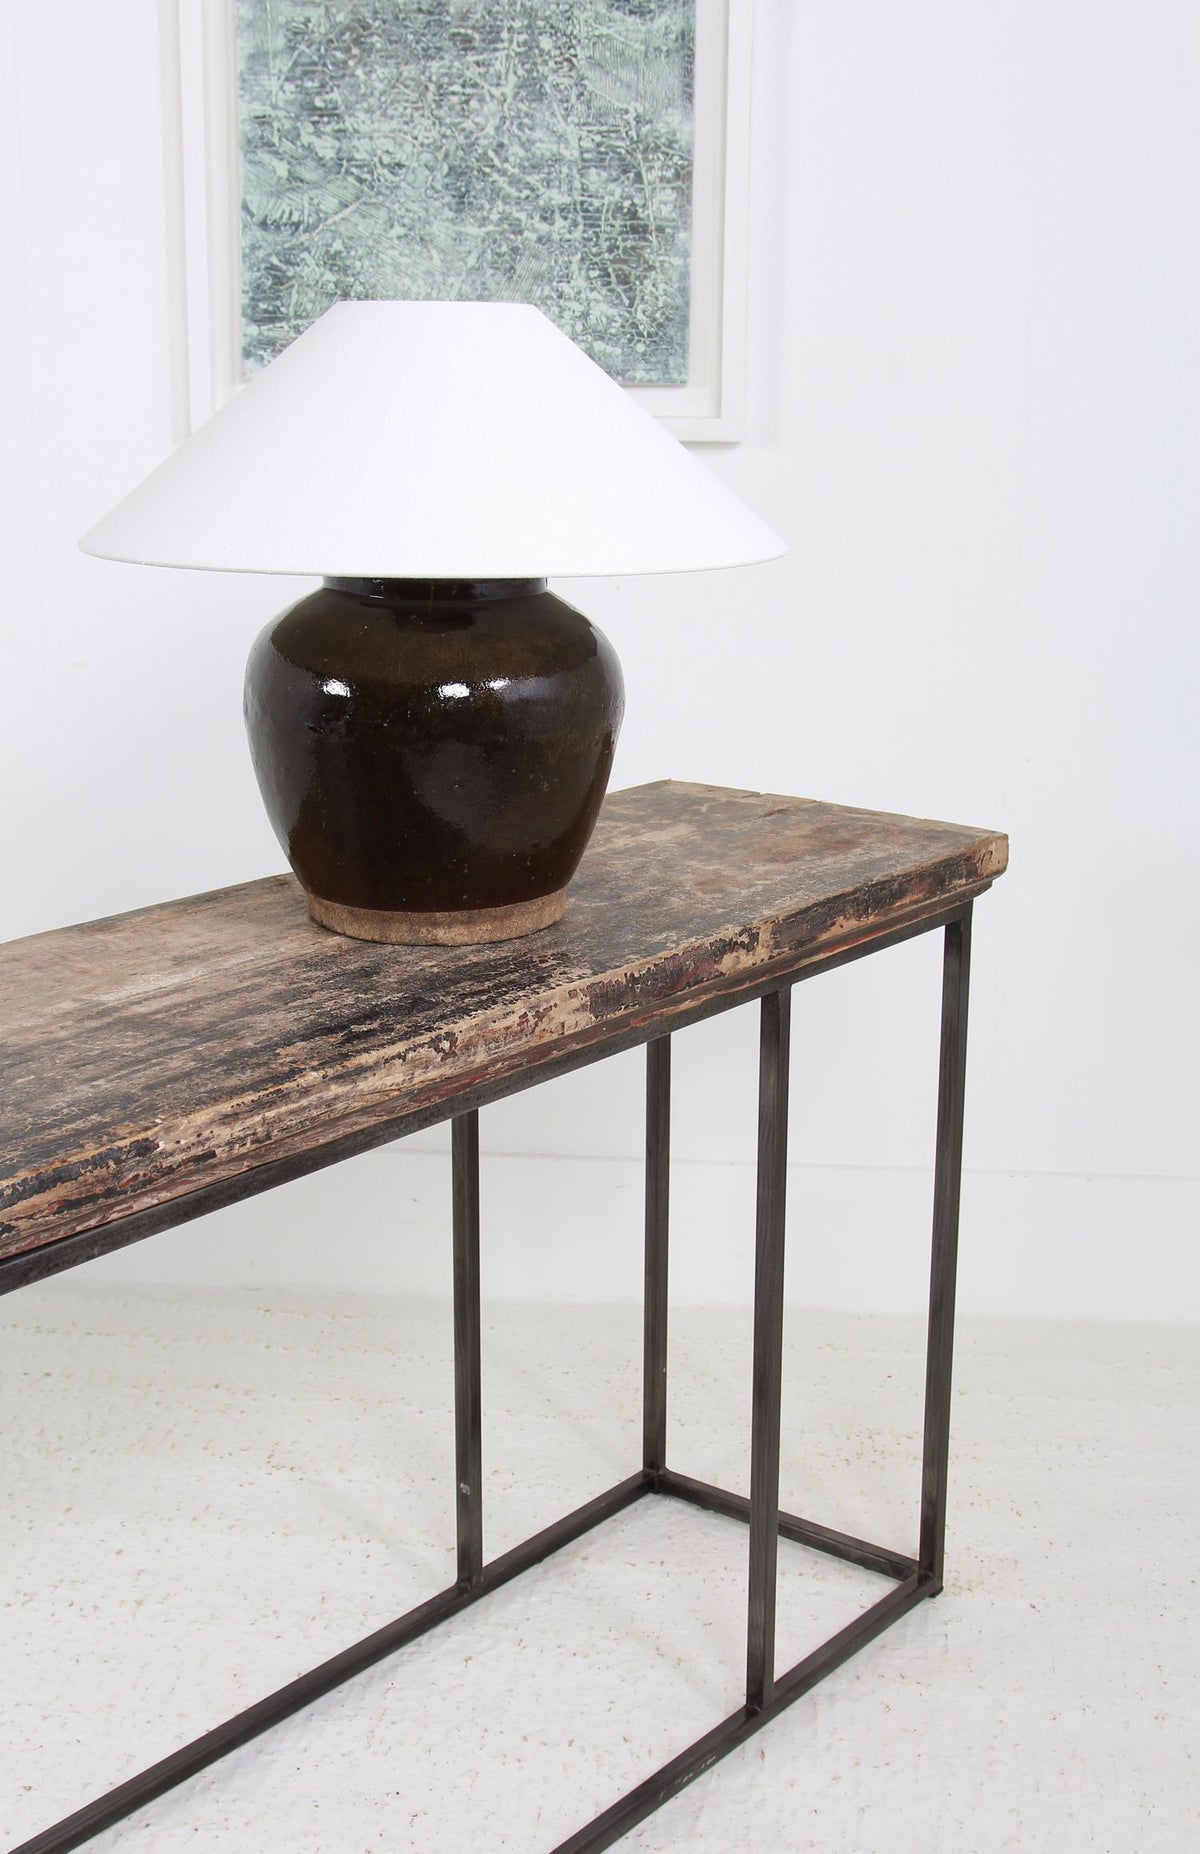 IMPRESSIVE ARCHITECTURAL WOOD & STEEL CONSOLE TABLE